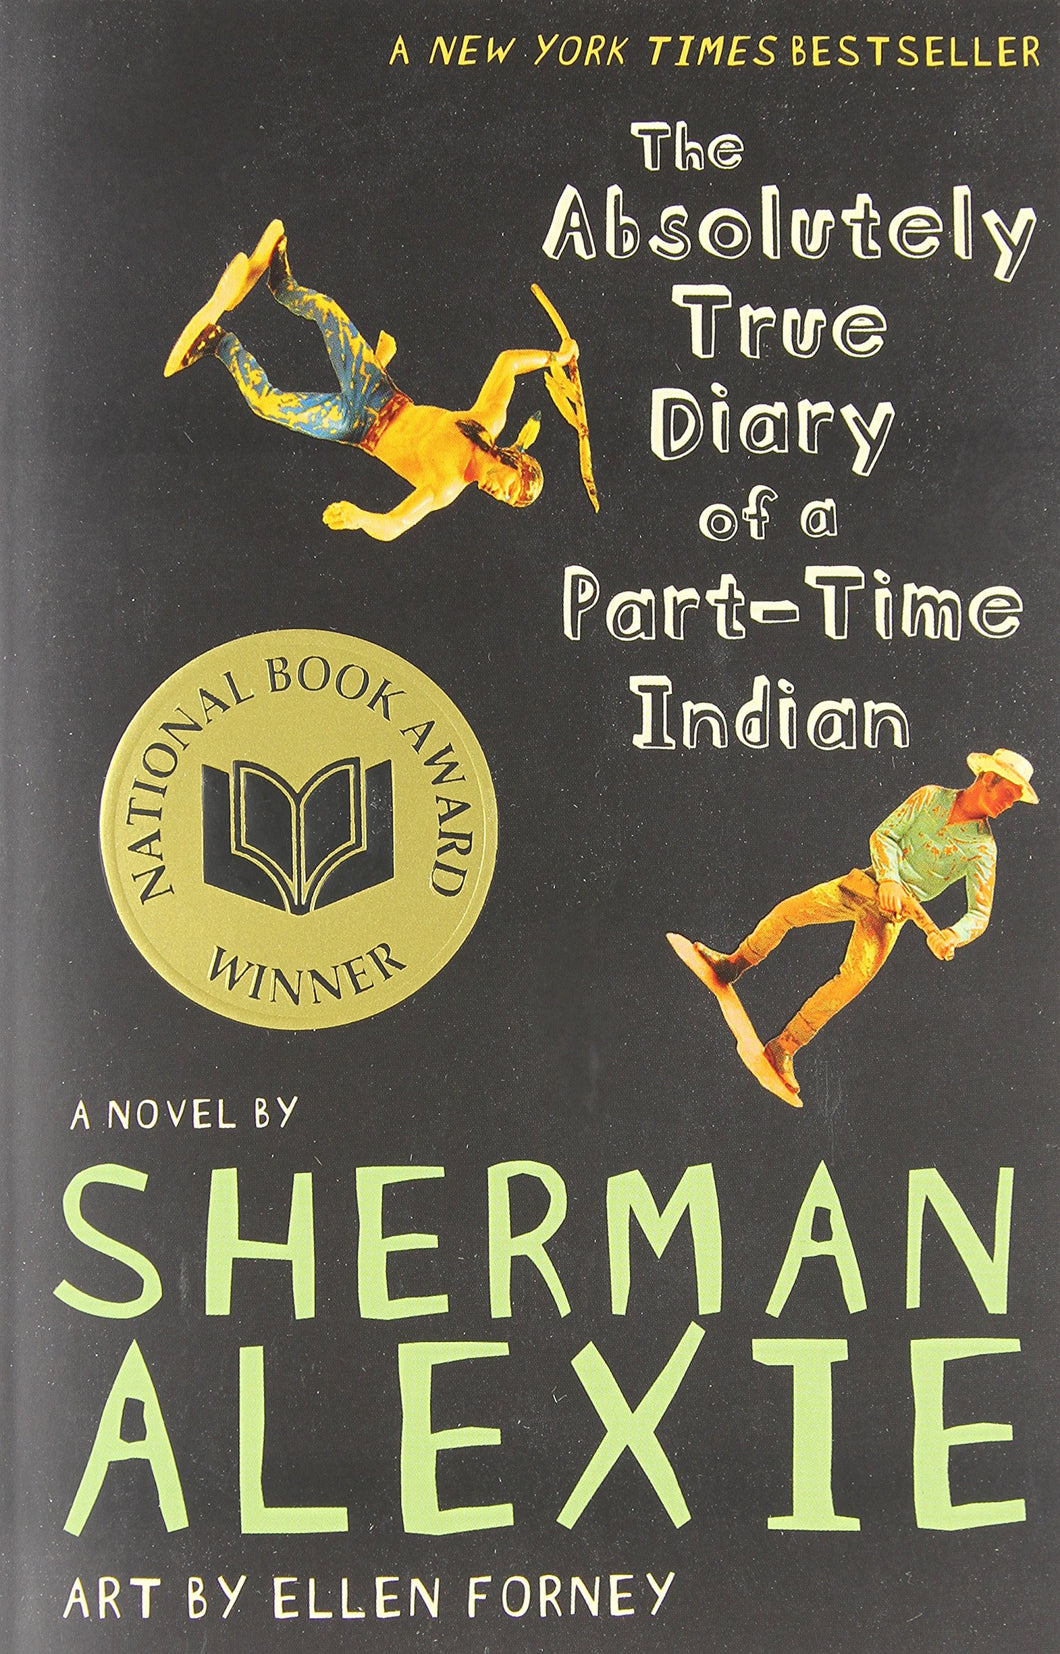 The Absolutely True Diary of a Part-Time Indian [Sherman Alexie]